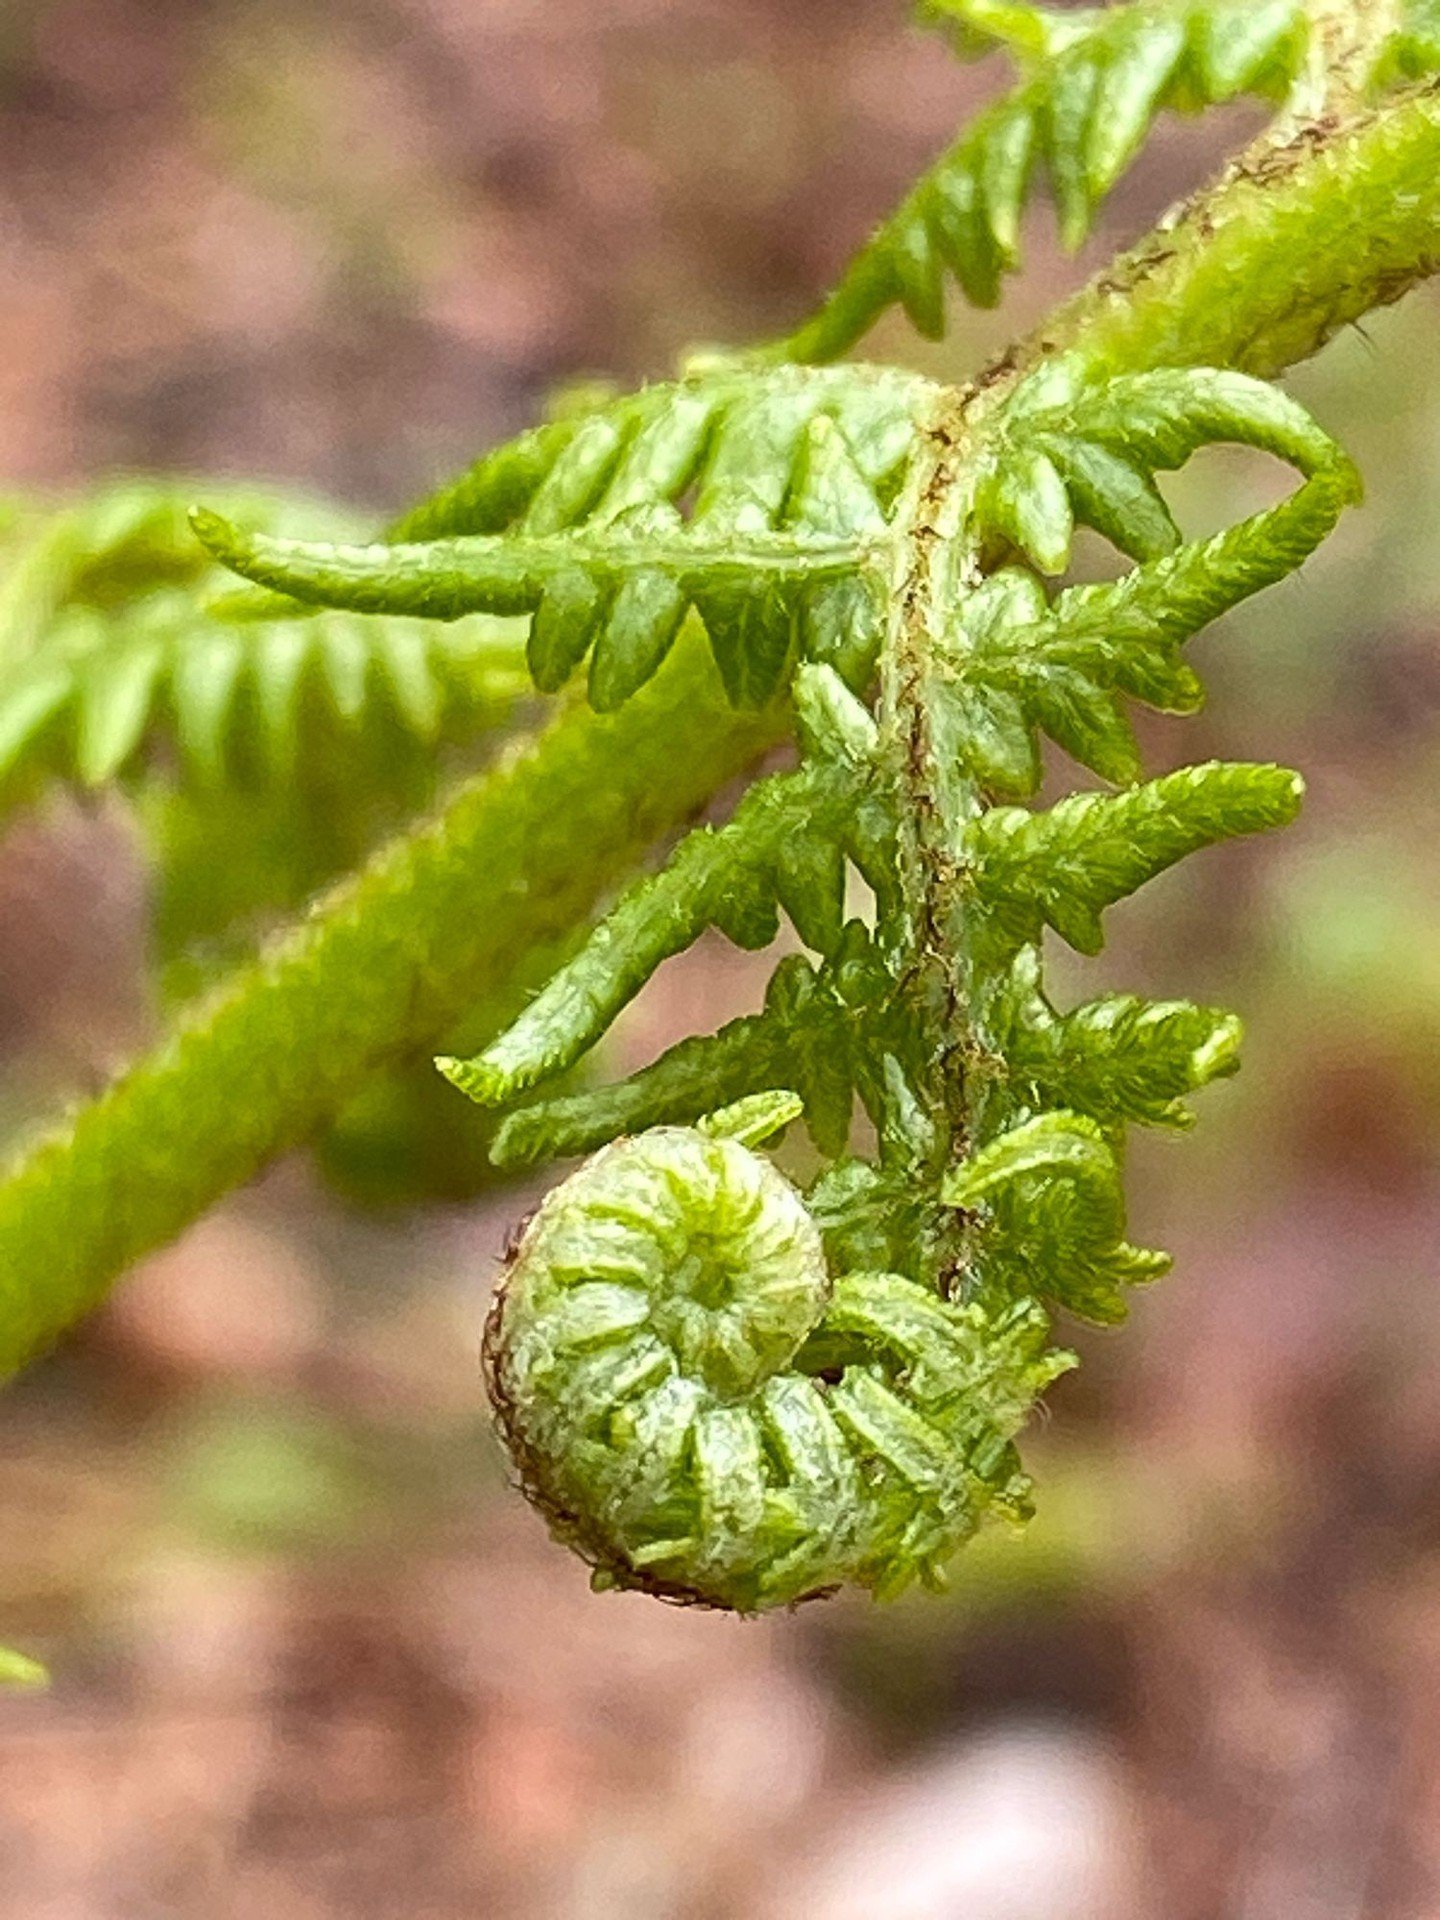 Oh the joy of seeing all the greenery unfold in the Forest again! 🍃😃

Happy Friday!

#fridayfeeling
#springtime
#ferns
#greenspace
#forestlife
#naturelover
#natureheals
#getourdoors
#newforest